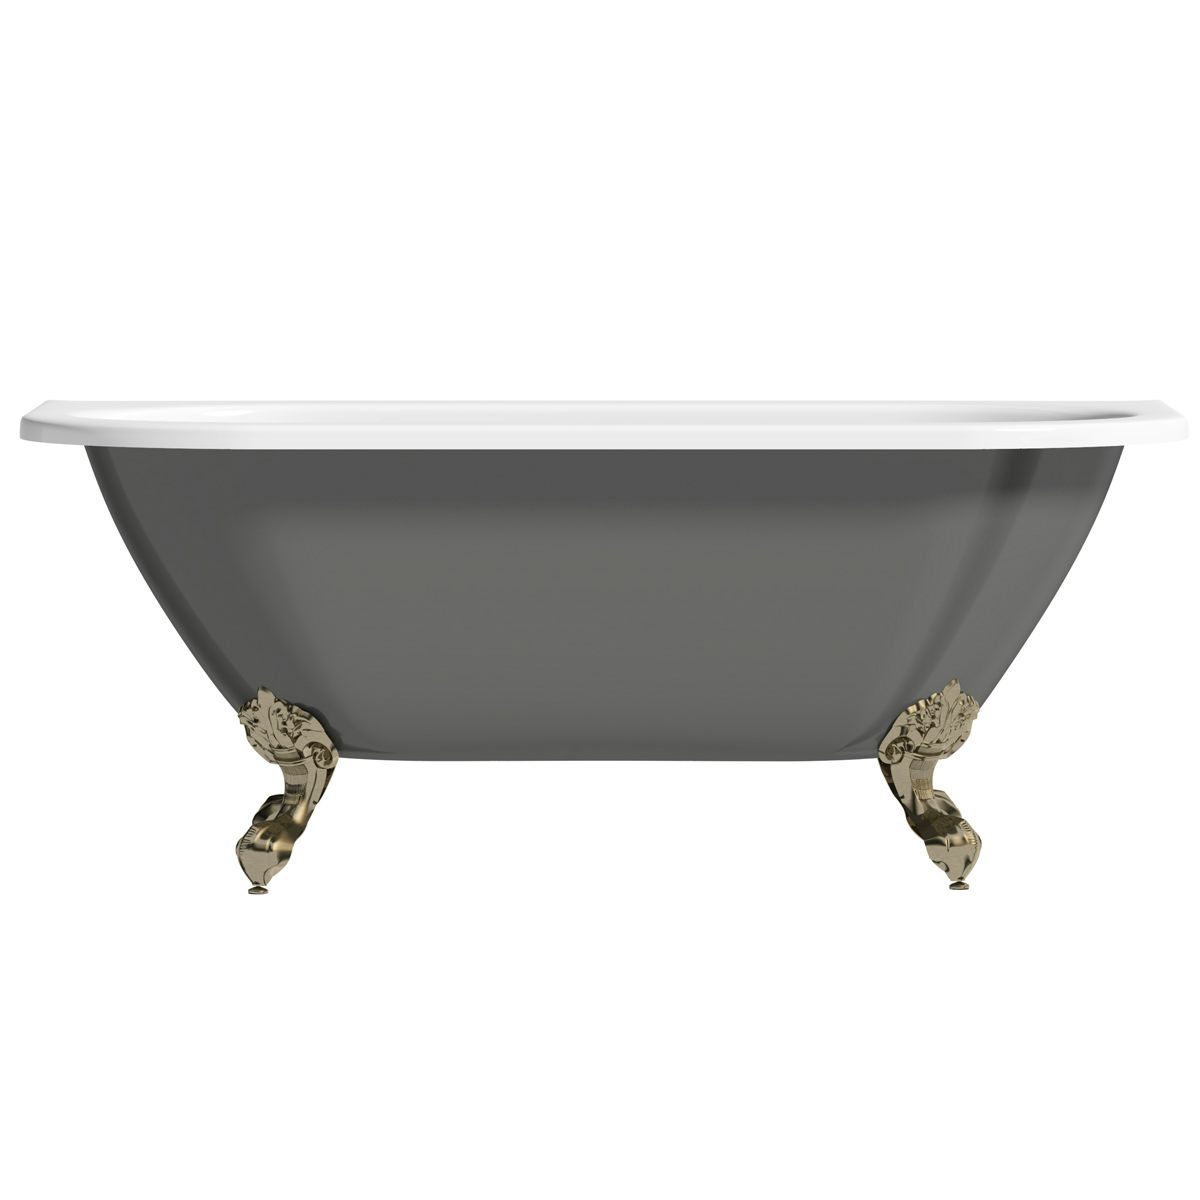 The Bath Co. Dalston grey back to wall freestanding bath with antique bronze ball and claw feet